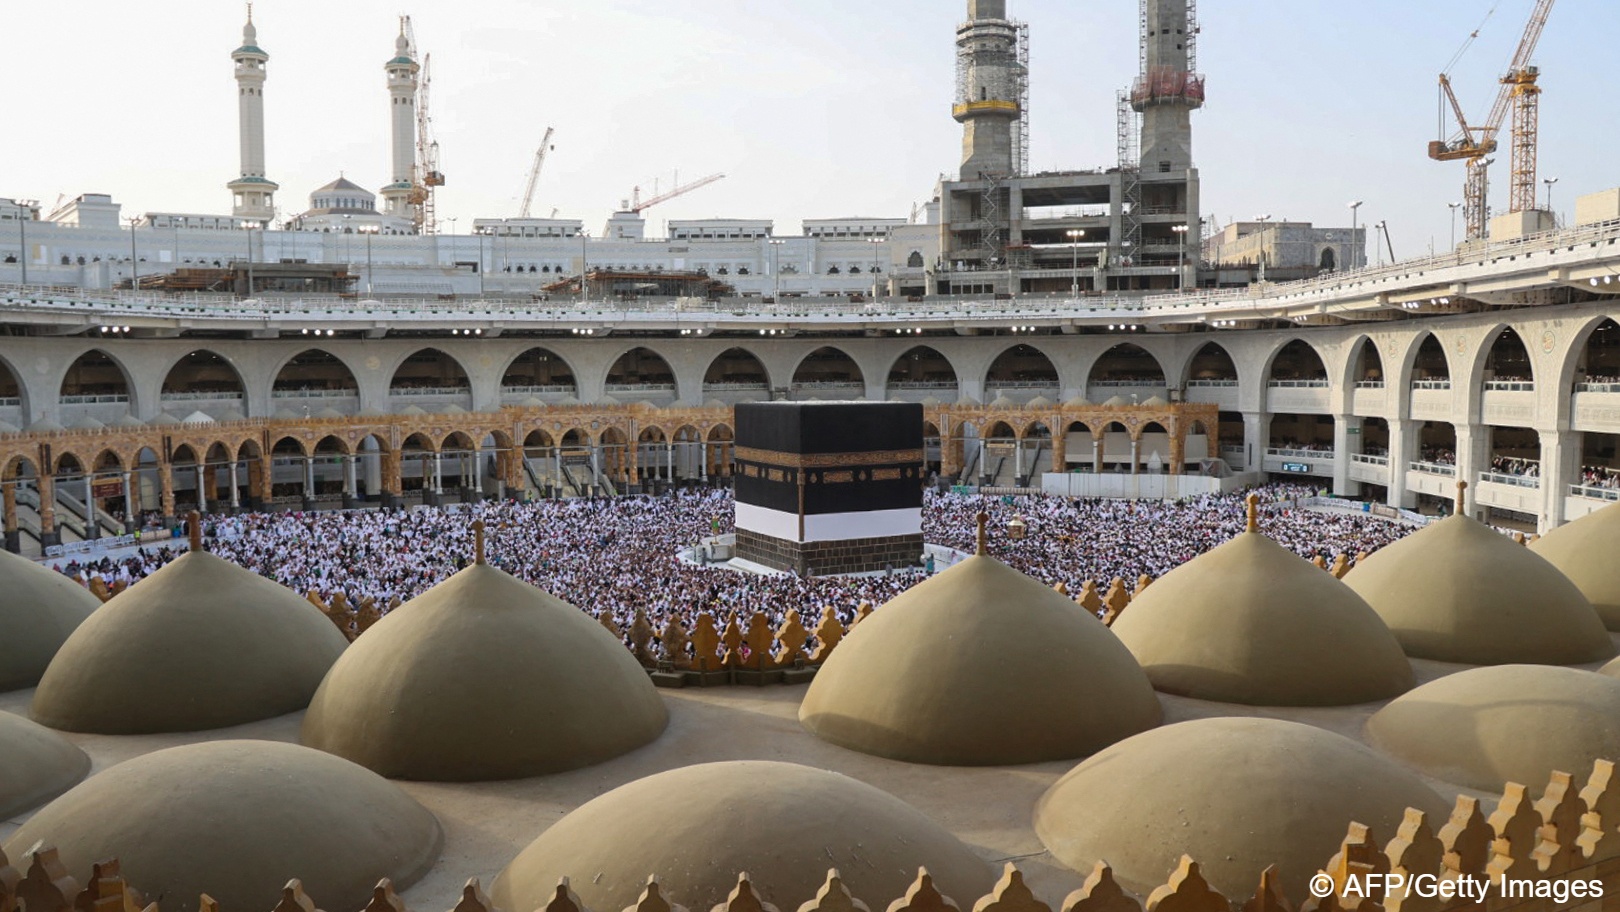  For two years pilgrims not already in Saudi Arabia were barred because of COVID-19 pandemic curbs (photo: AFP) 